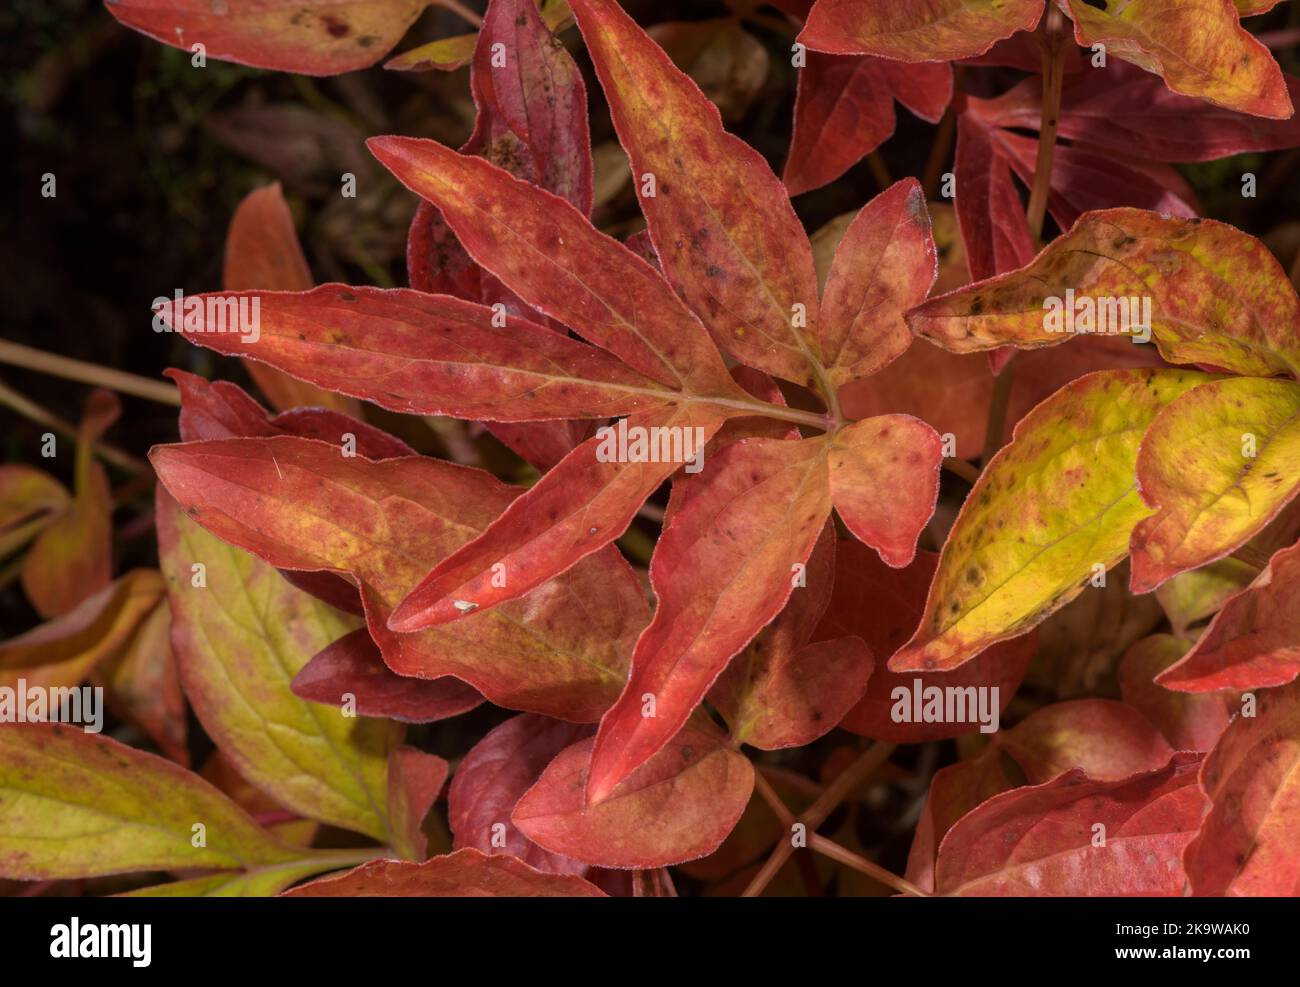 The leaves of a Peony, Paeonia lactiflora 'Krinkled White' in October, with autumn colour. Garden. Stock Photo